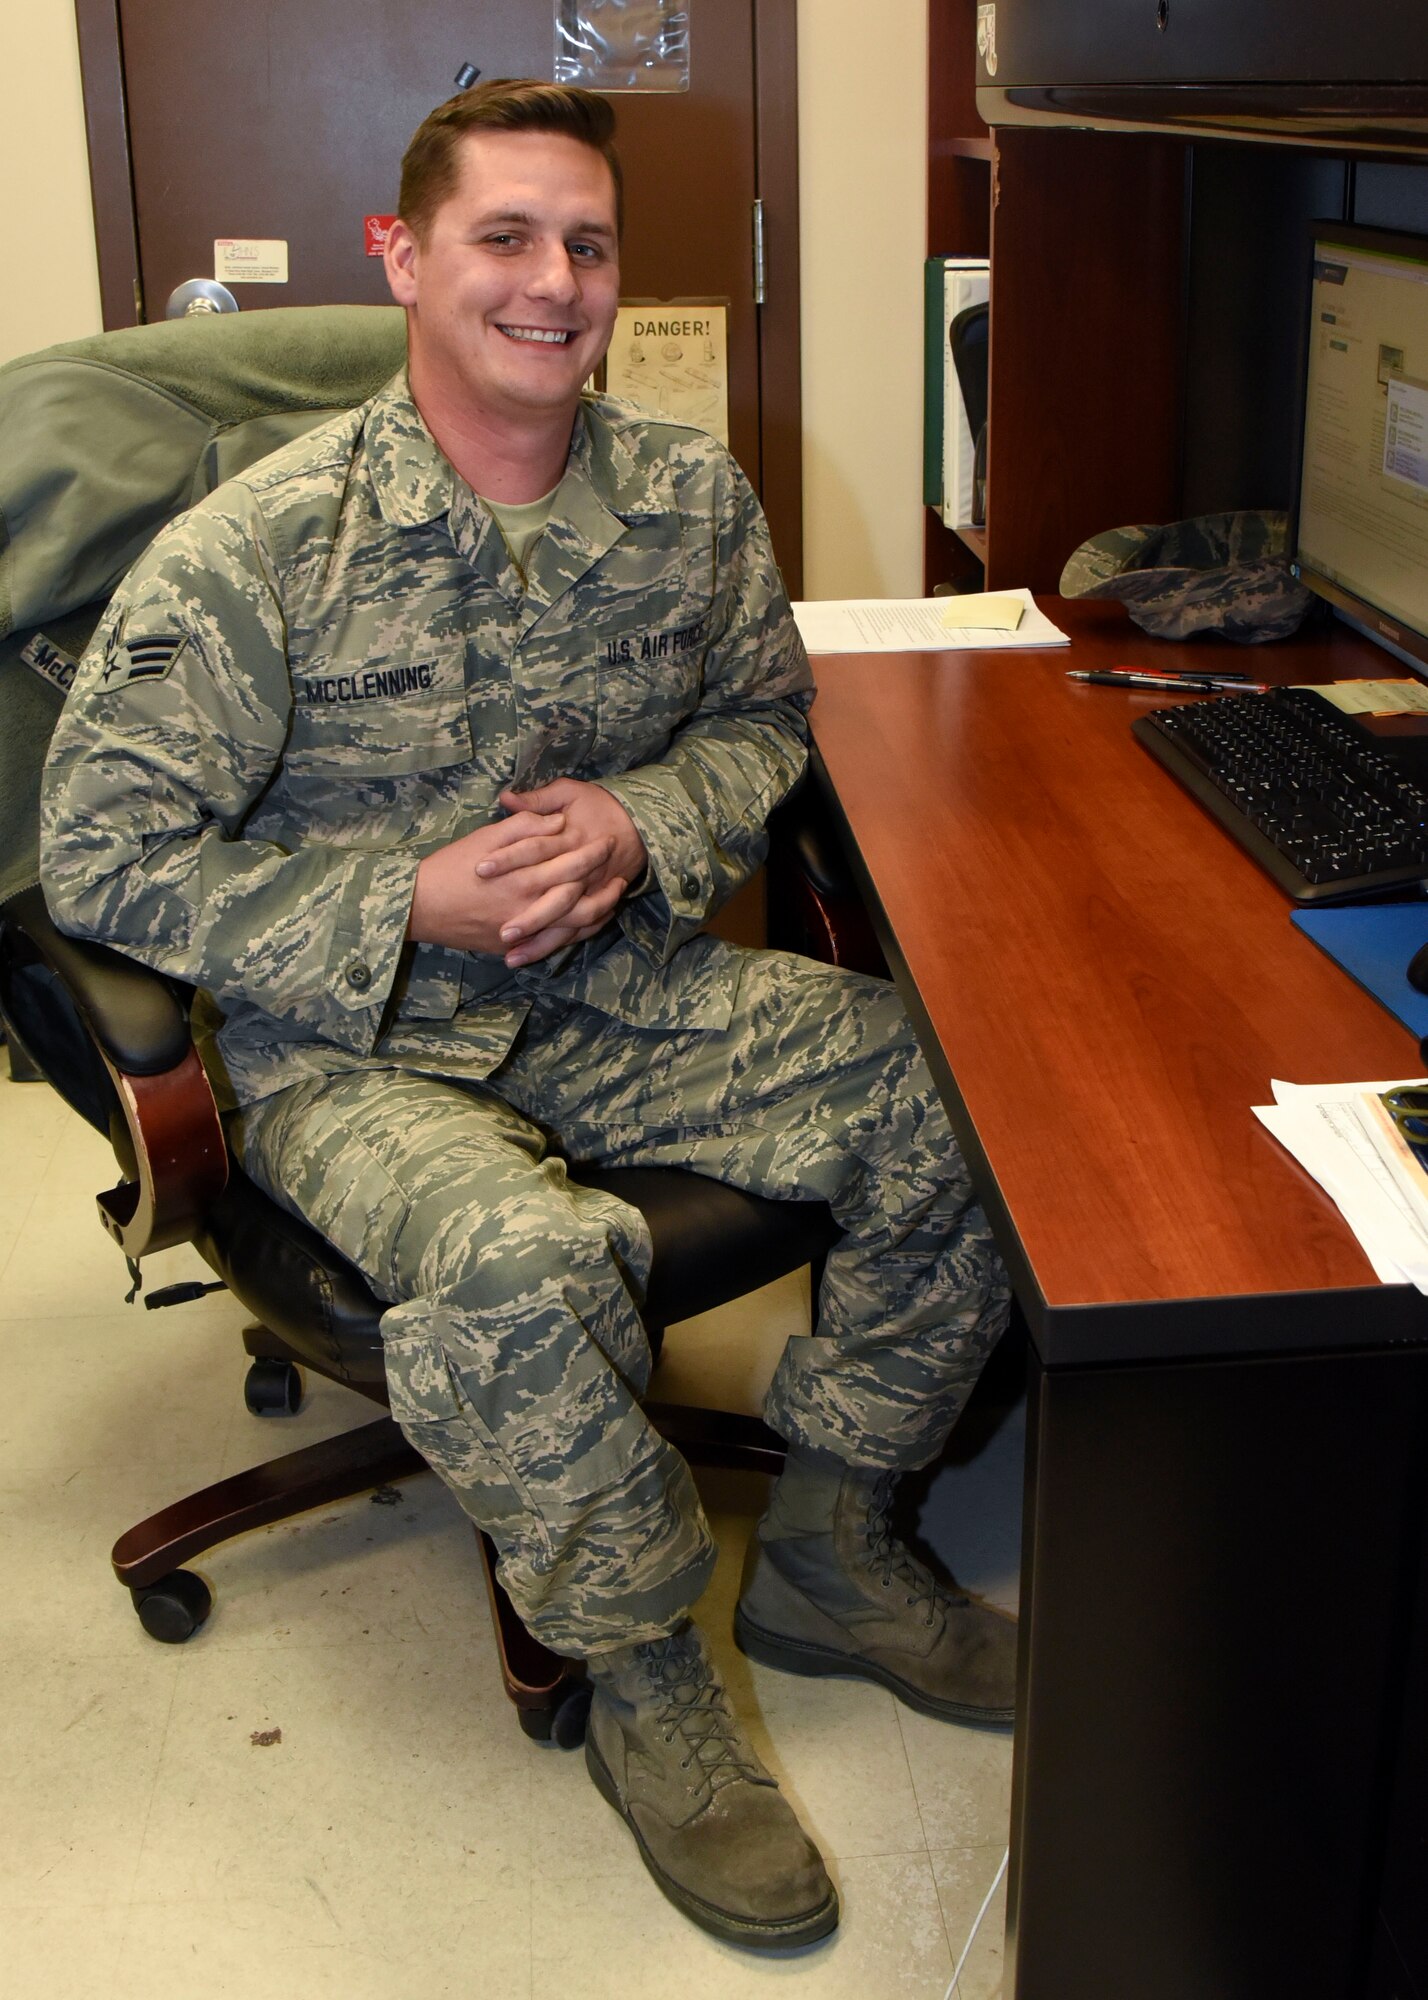 Senior Airman Michael McClenning poses for a photo at his desk Nov. 20, 2017 at Warfield Air National Guard Base, Middle River, Md. McClening spends his days off riding dirt bikes with his friends preparing for the next motocross race they will enter. (U.S. Air National Guard photo by Senior Airman Enjoli Saunders)